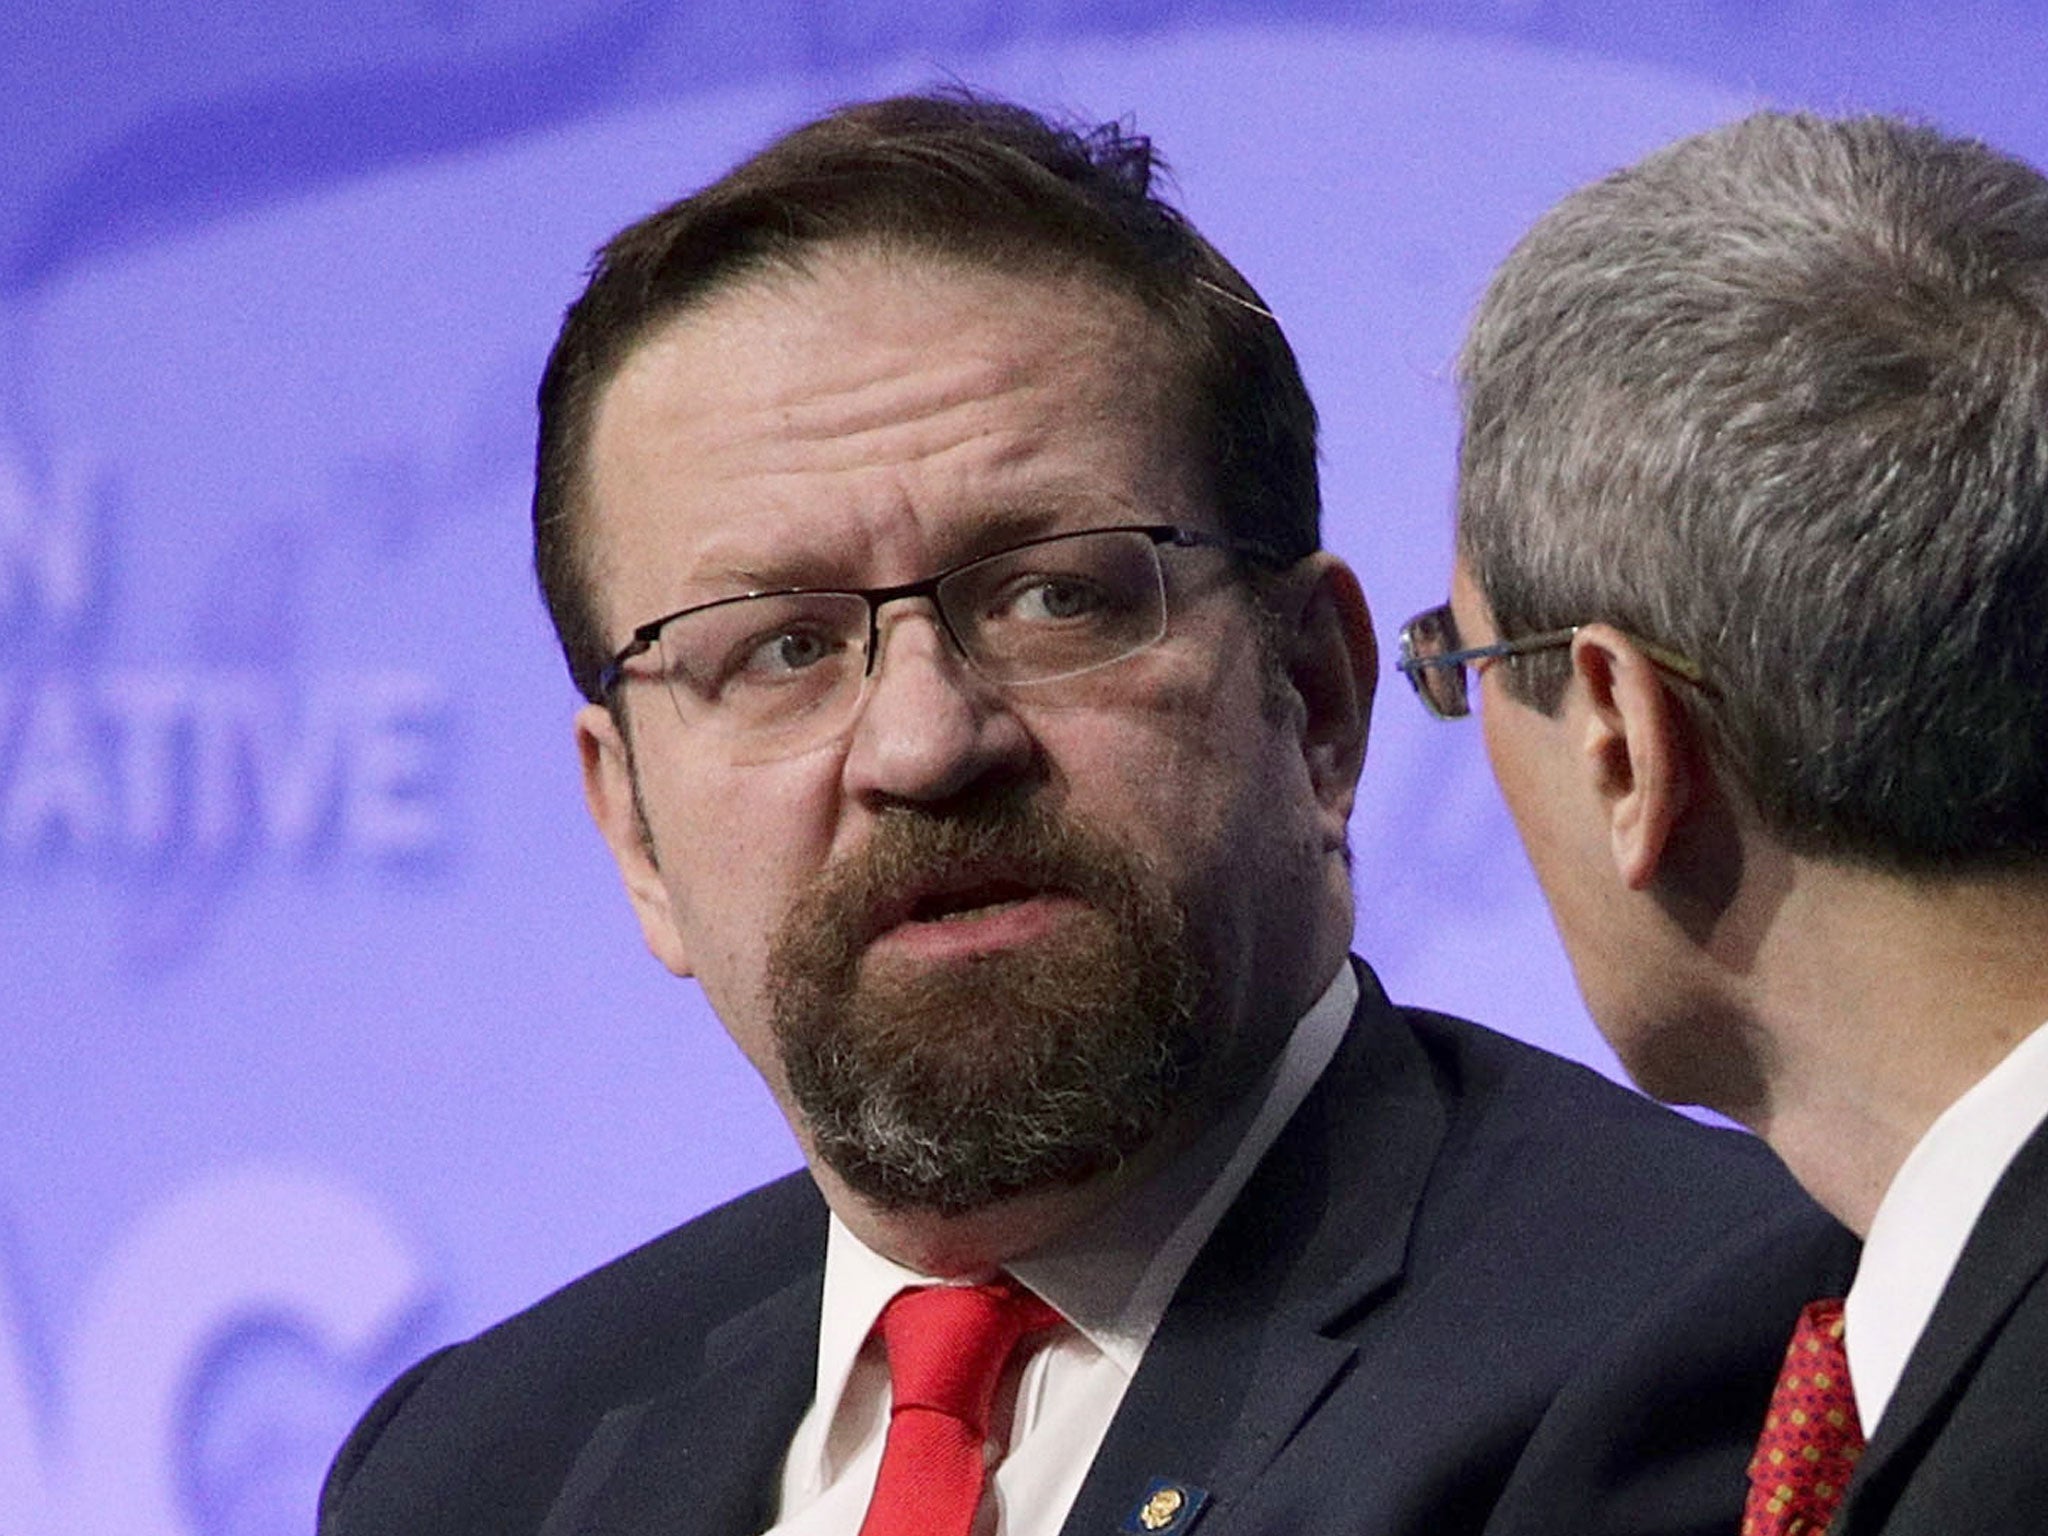 Sebastian Gorka, a former counter-terrorism analyst for Fox News, will be leaving the White House in the coming days